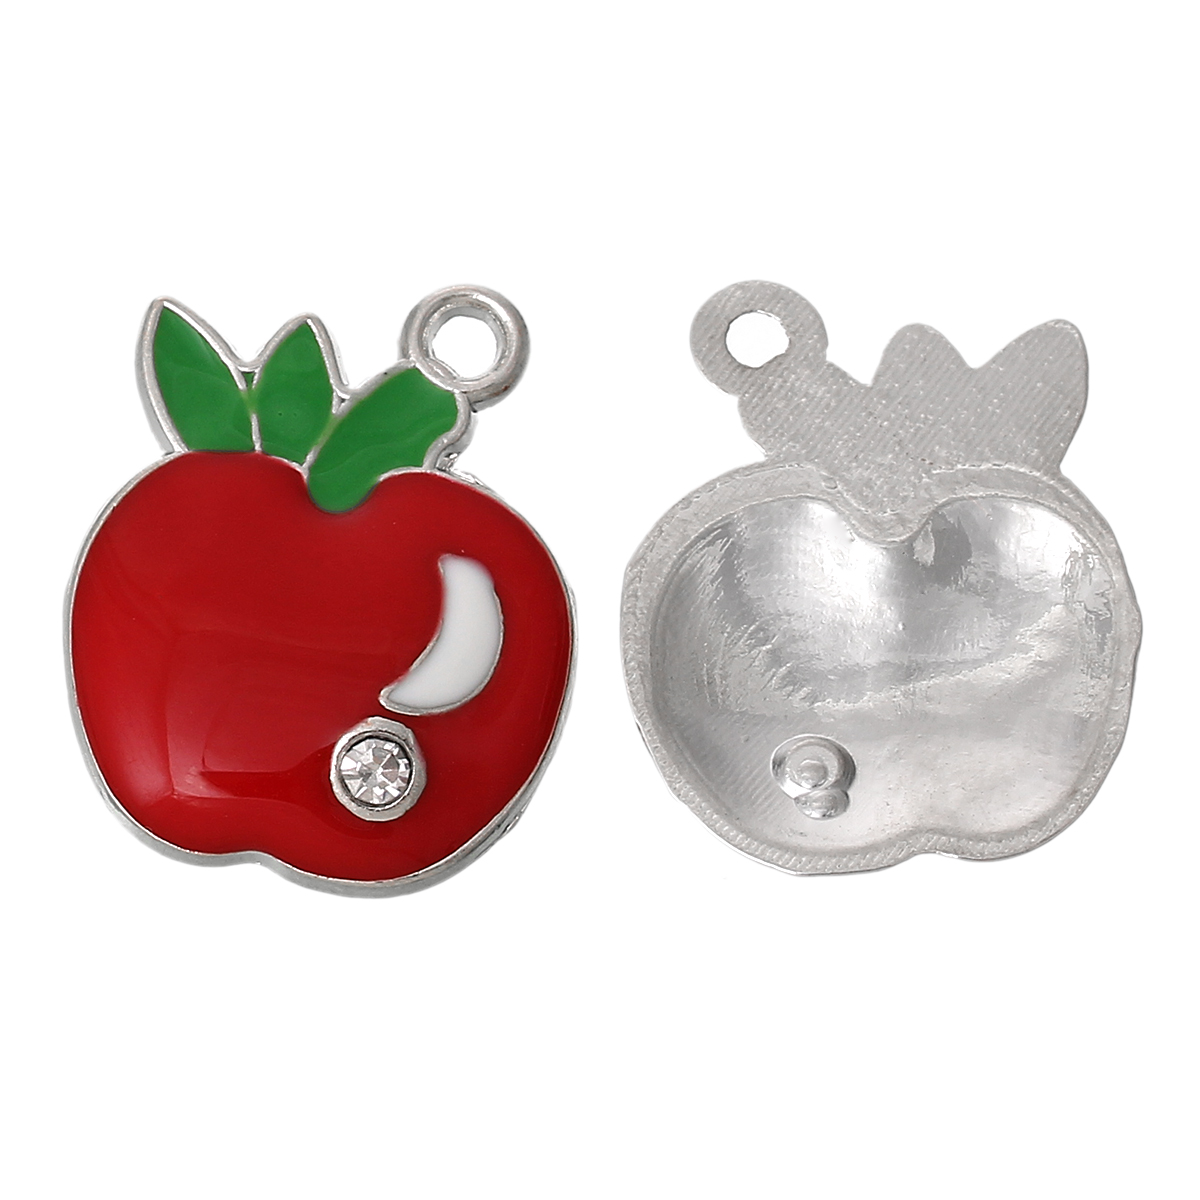 Picture of Zinc Based Alloy Charms Apple Fruit Silver Tone Clear Rhinestone Red & Green Enamel 26mm x 20mm(1" x 6/8"), 20 PCs